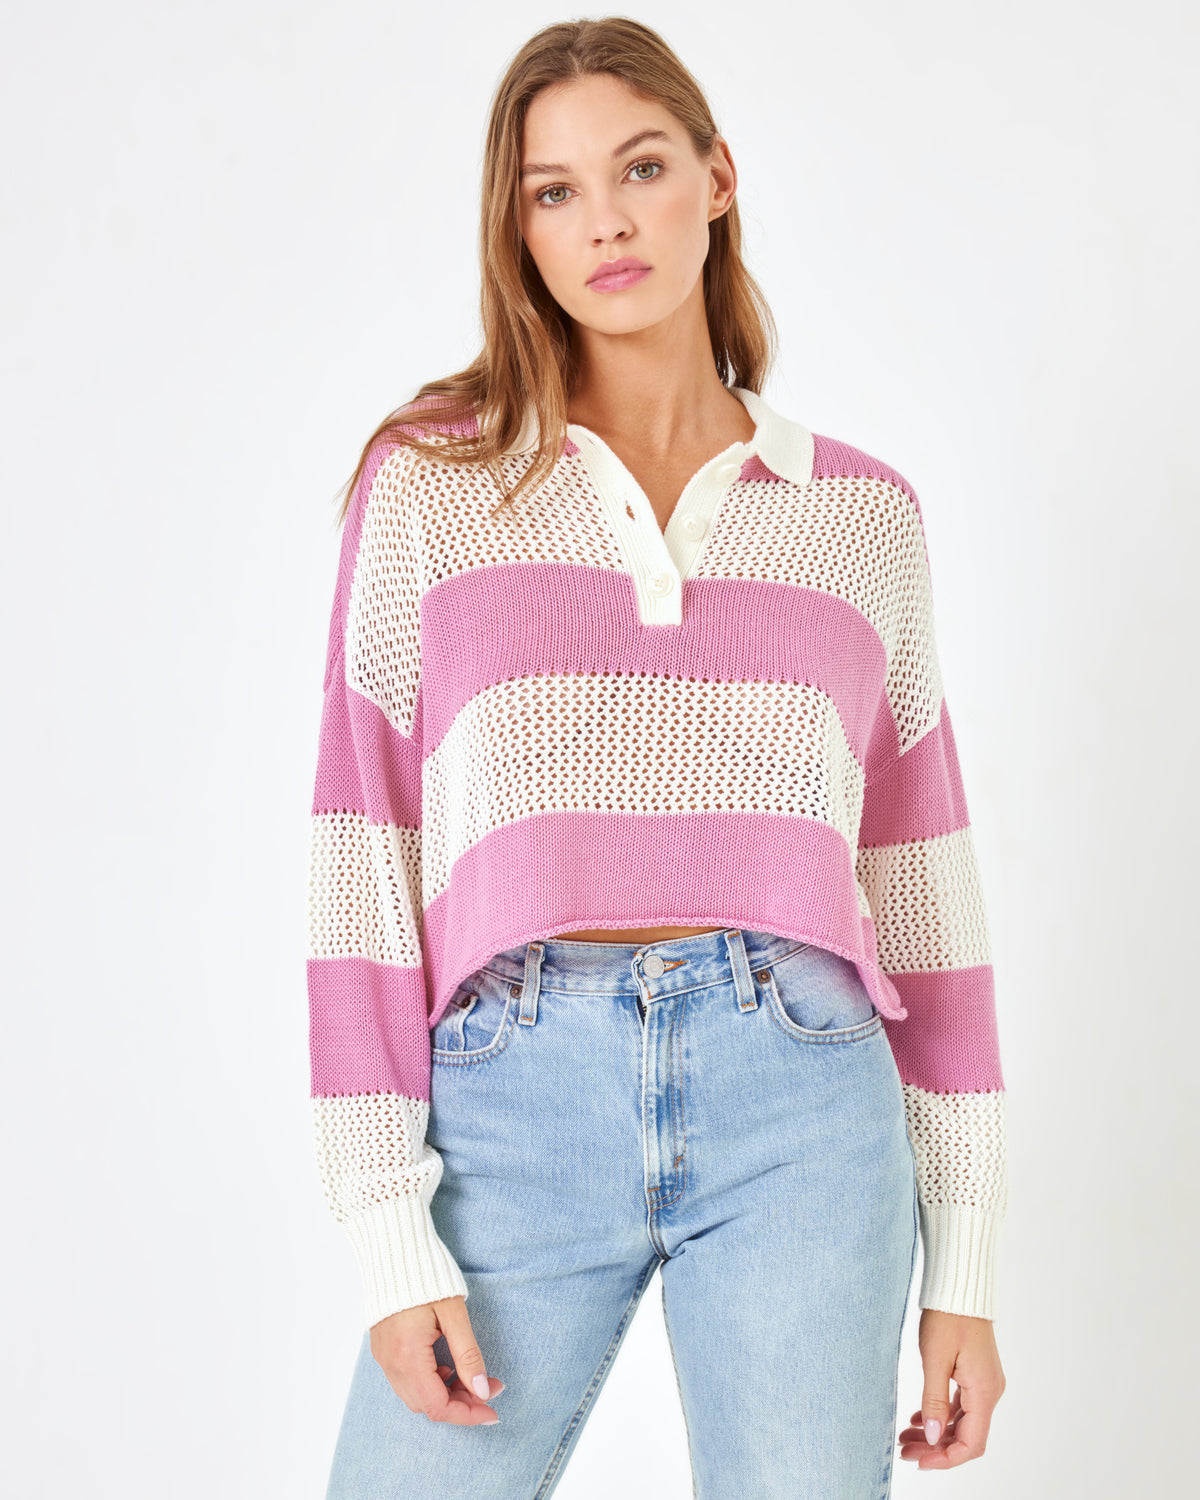 LSPACE X Anthropologie Rugby Sweater - Pink Lady Pink Lady | Model: Daria (size: S)